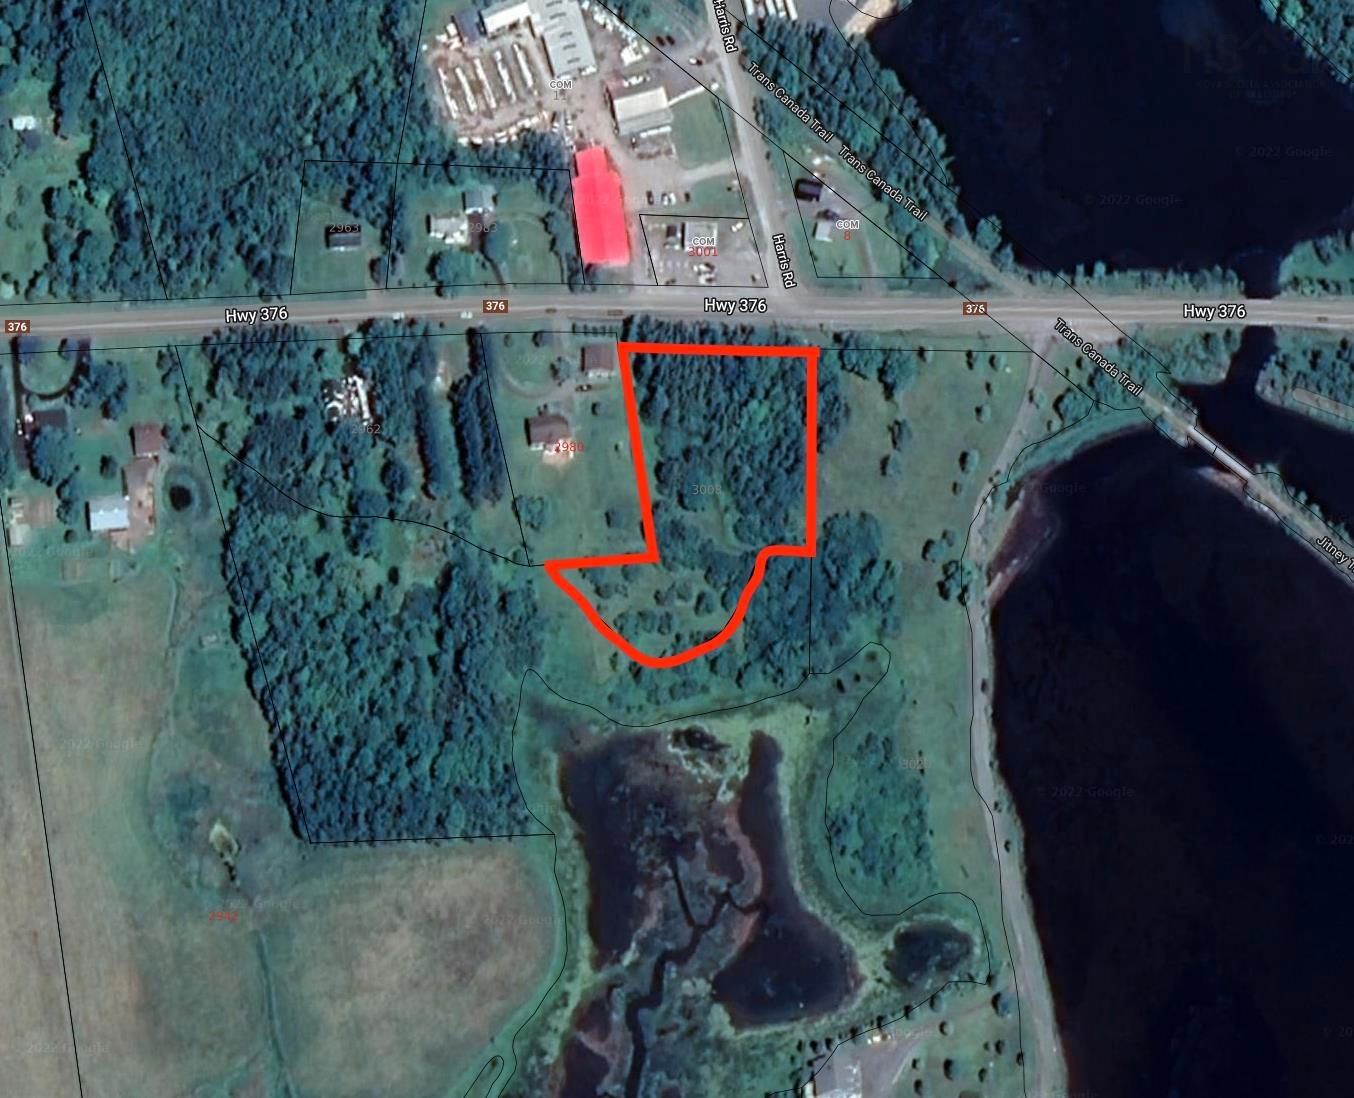 Main Photo: 3008 Highway 376 in Haliburton: 108-Rural Pictou County Vacant Land for sale (Northern Region)  : MLS®# 202220213